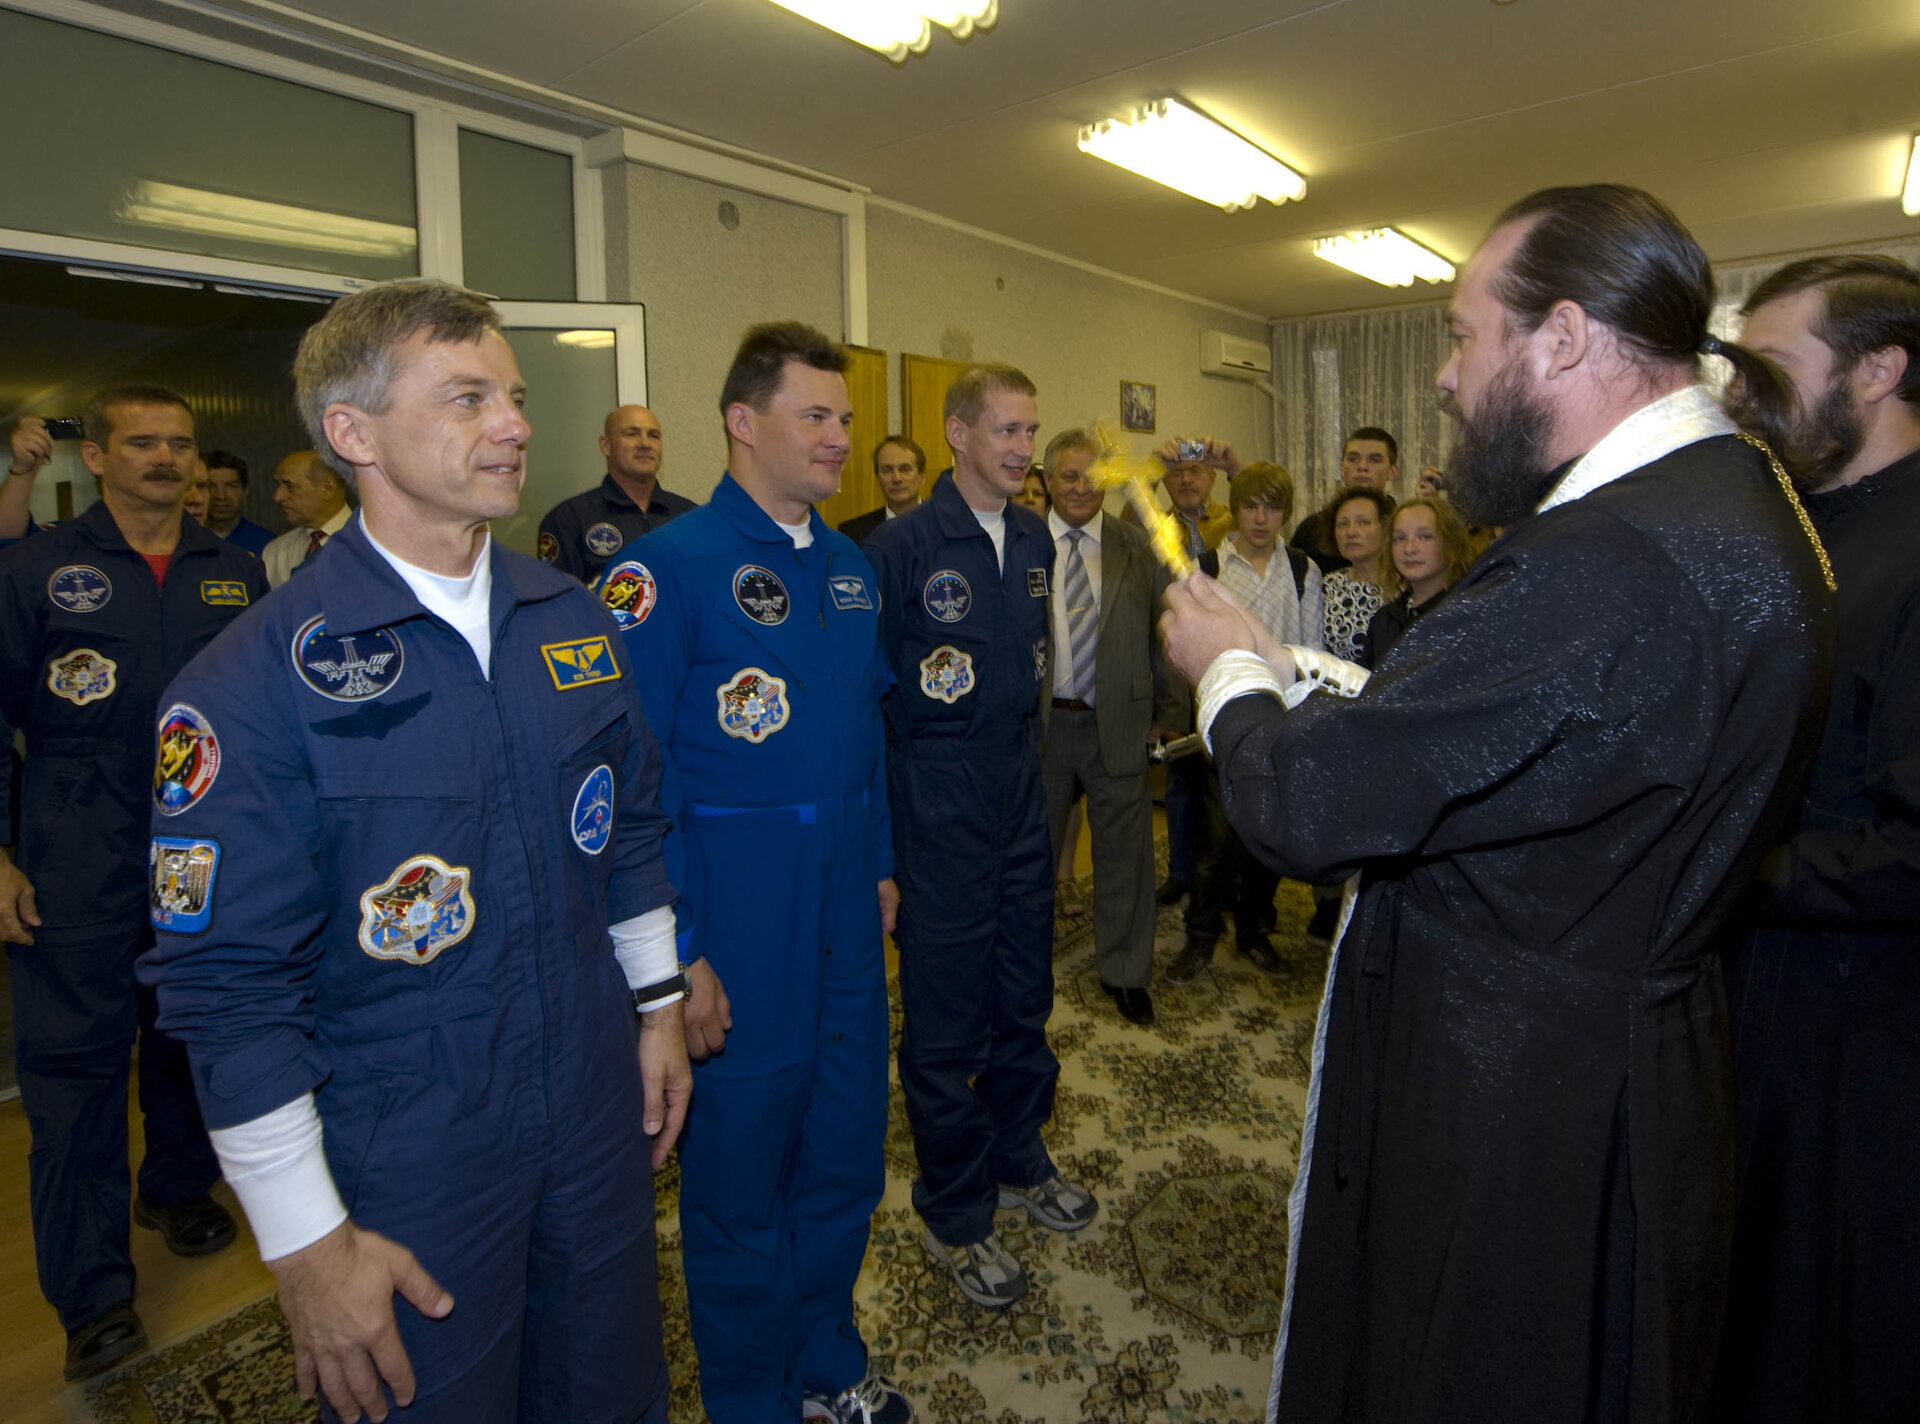 Soyuz TMA-15 crew receive a blessing on launch day